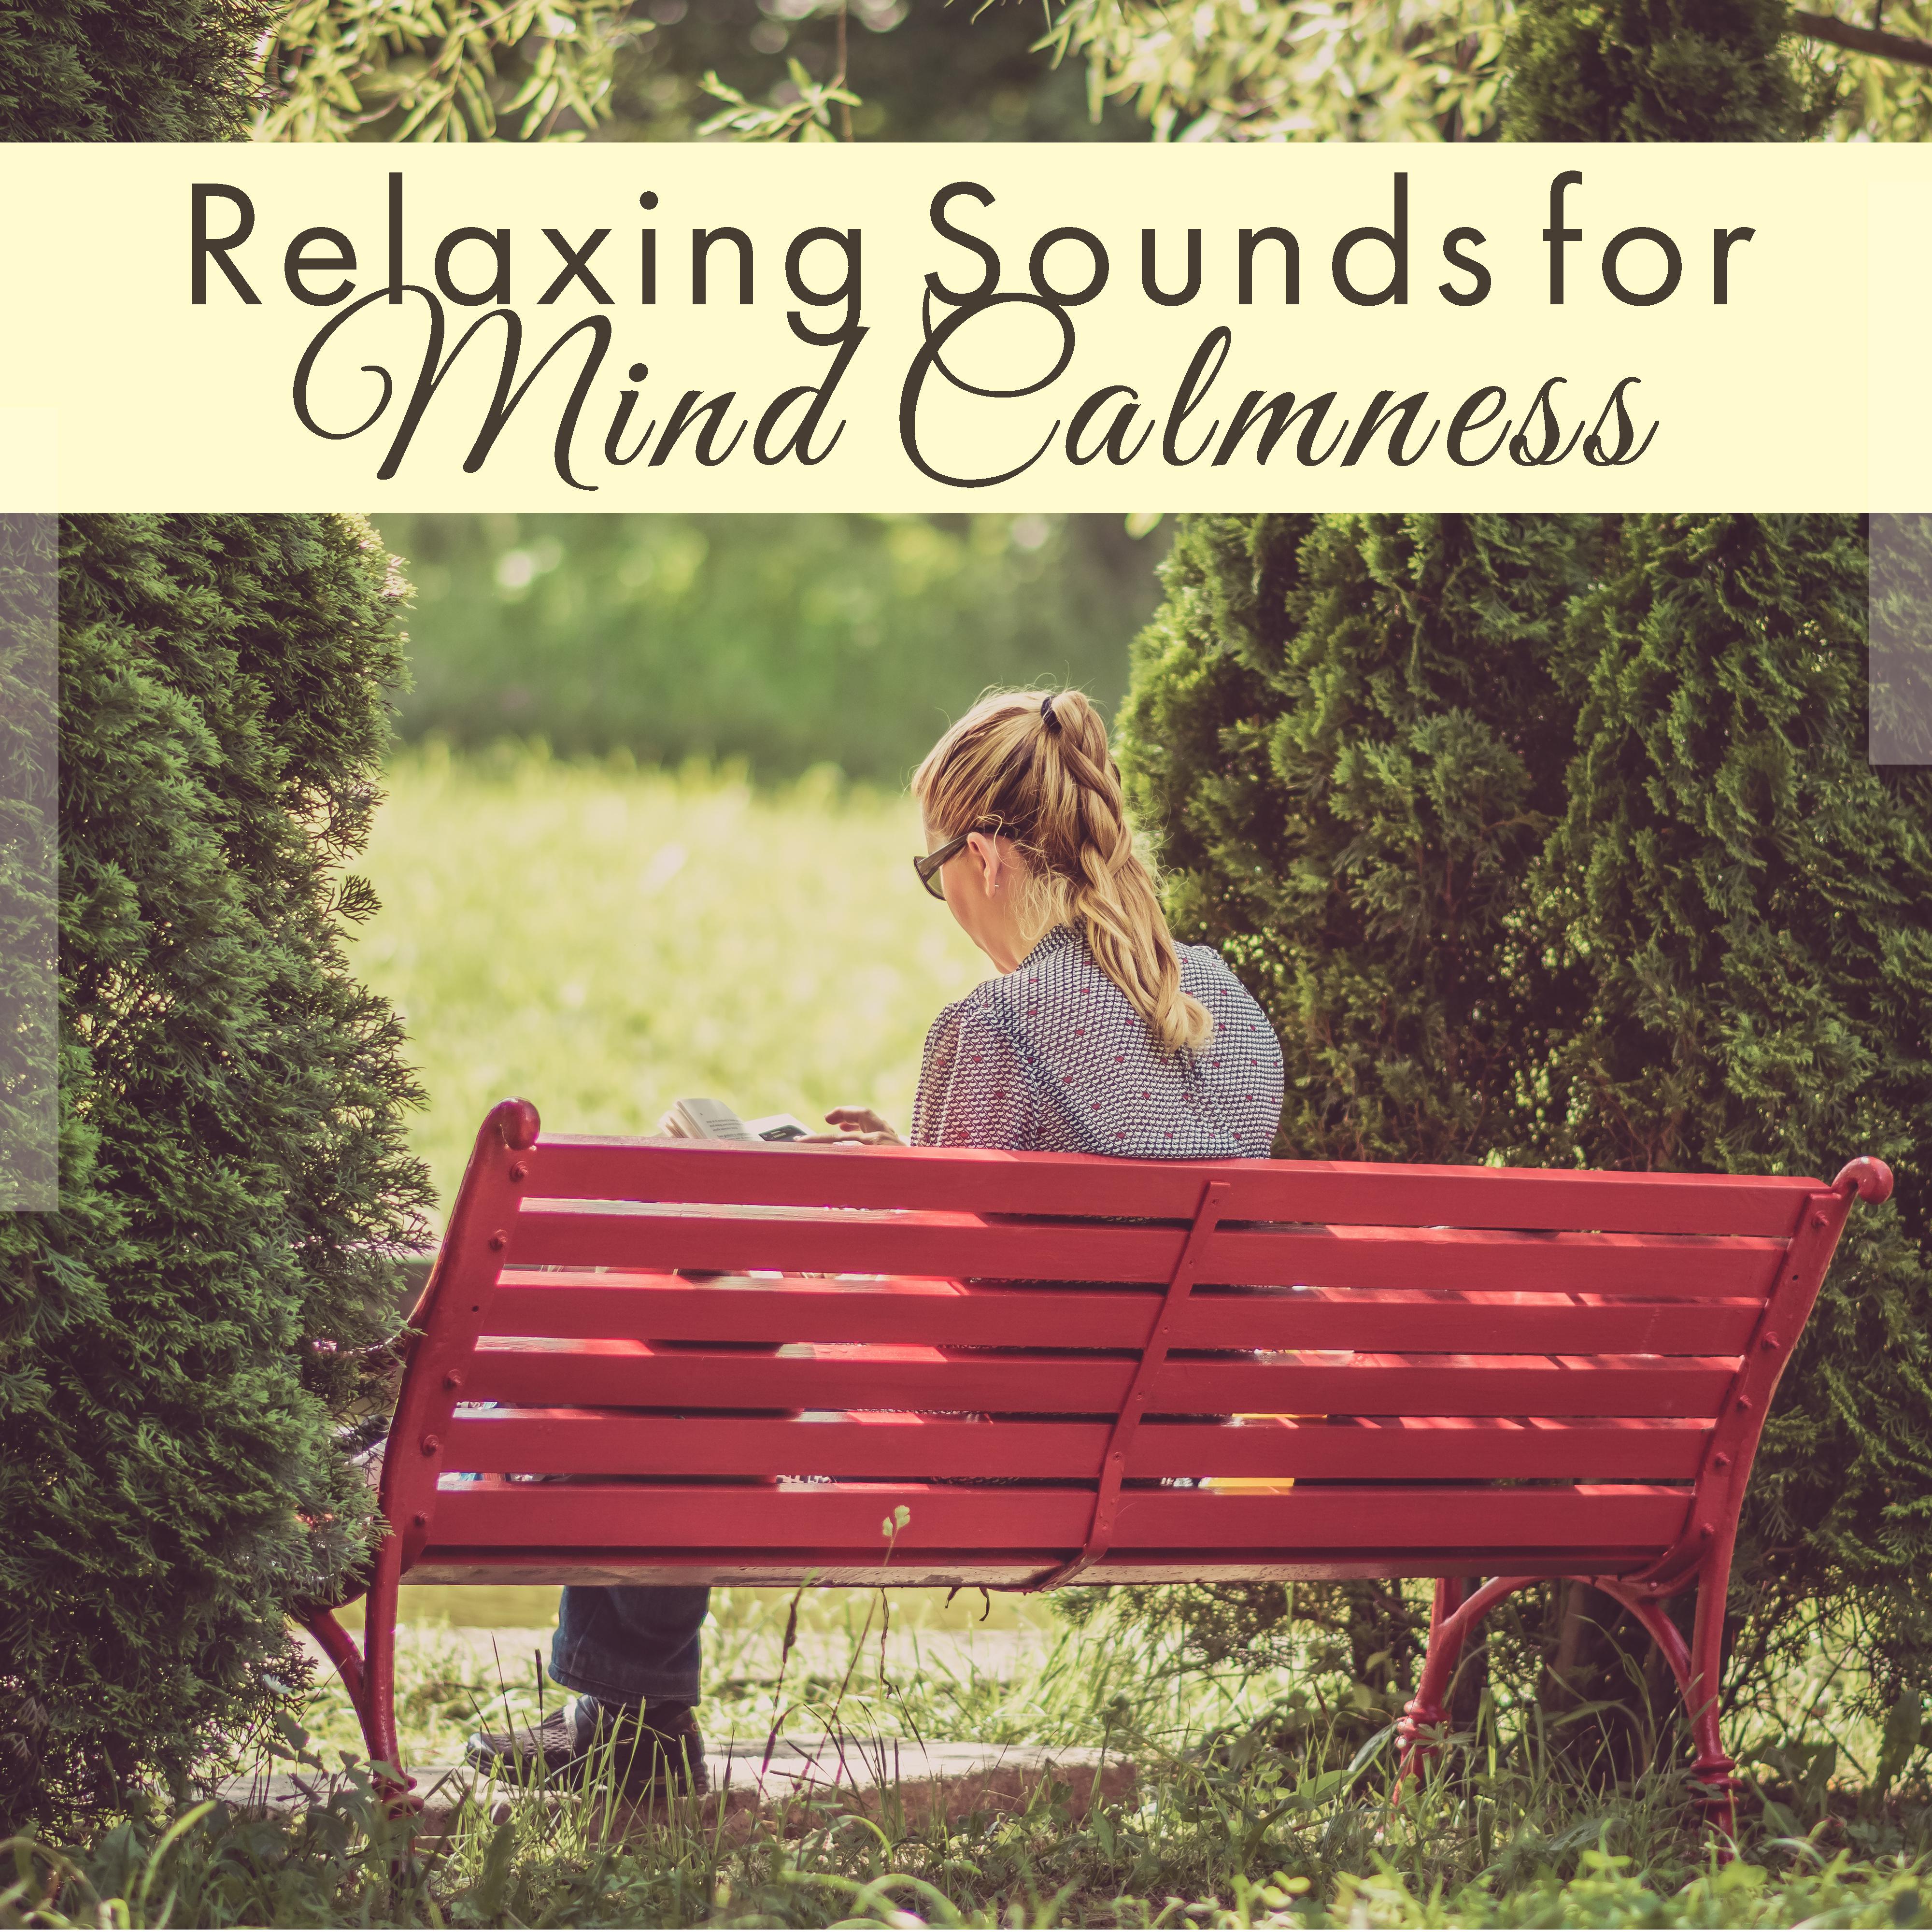 Relaxing Sounds for Mind Calmness – Soft Sounds, Easy Listening, Peaceful Beats, Stress Relieve, Healing Therapy